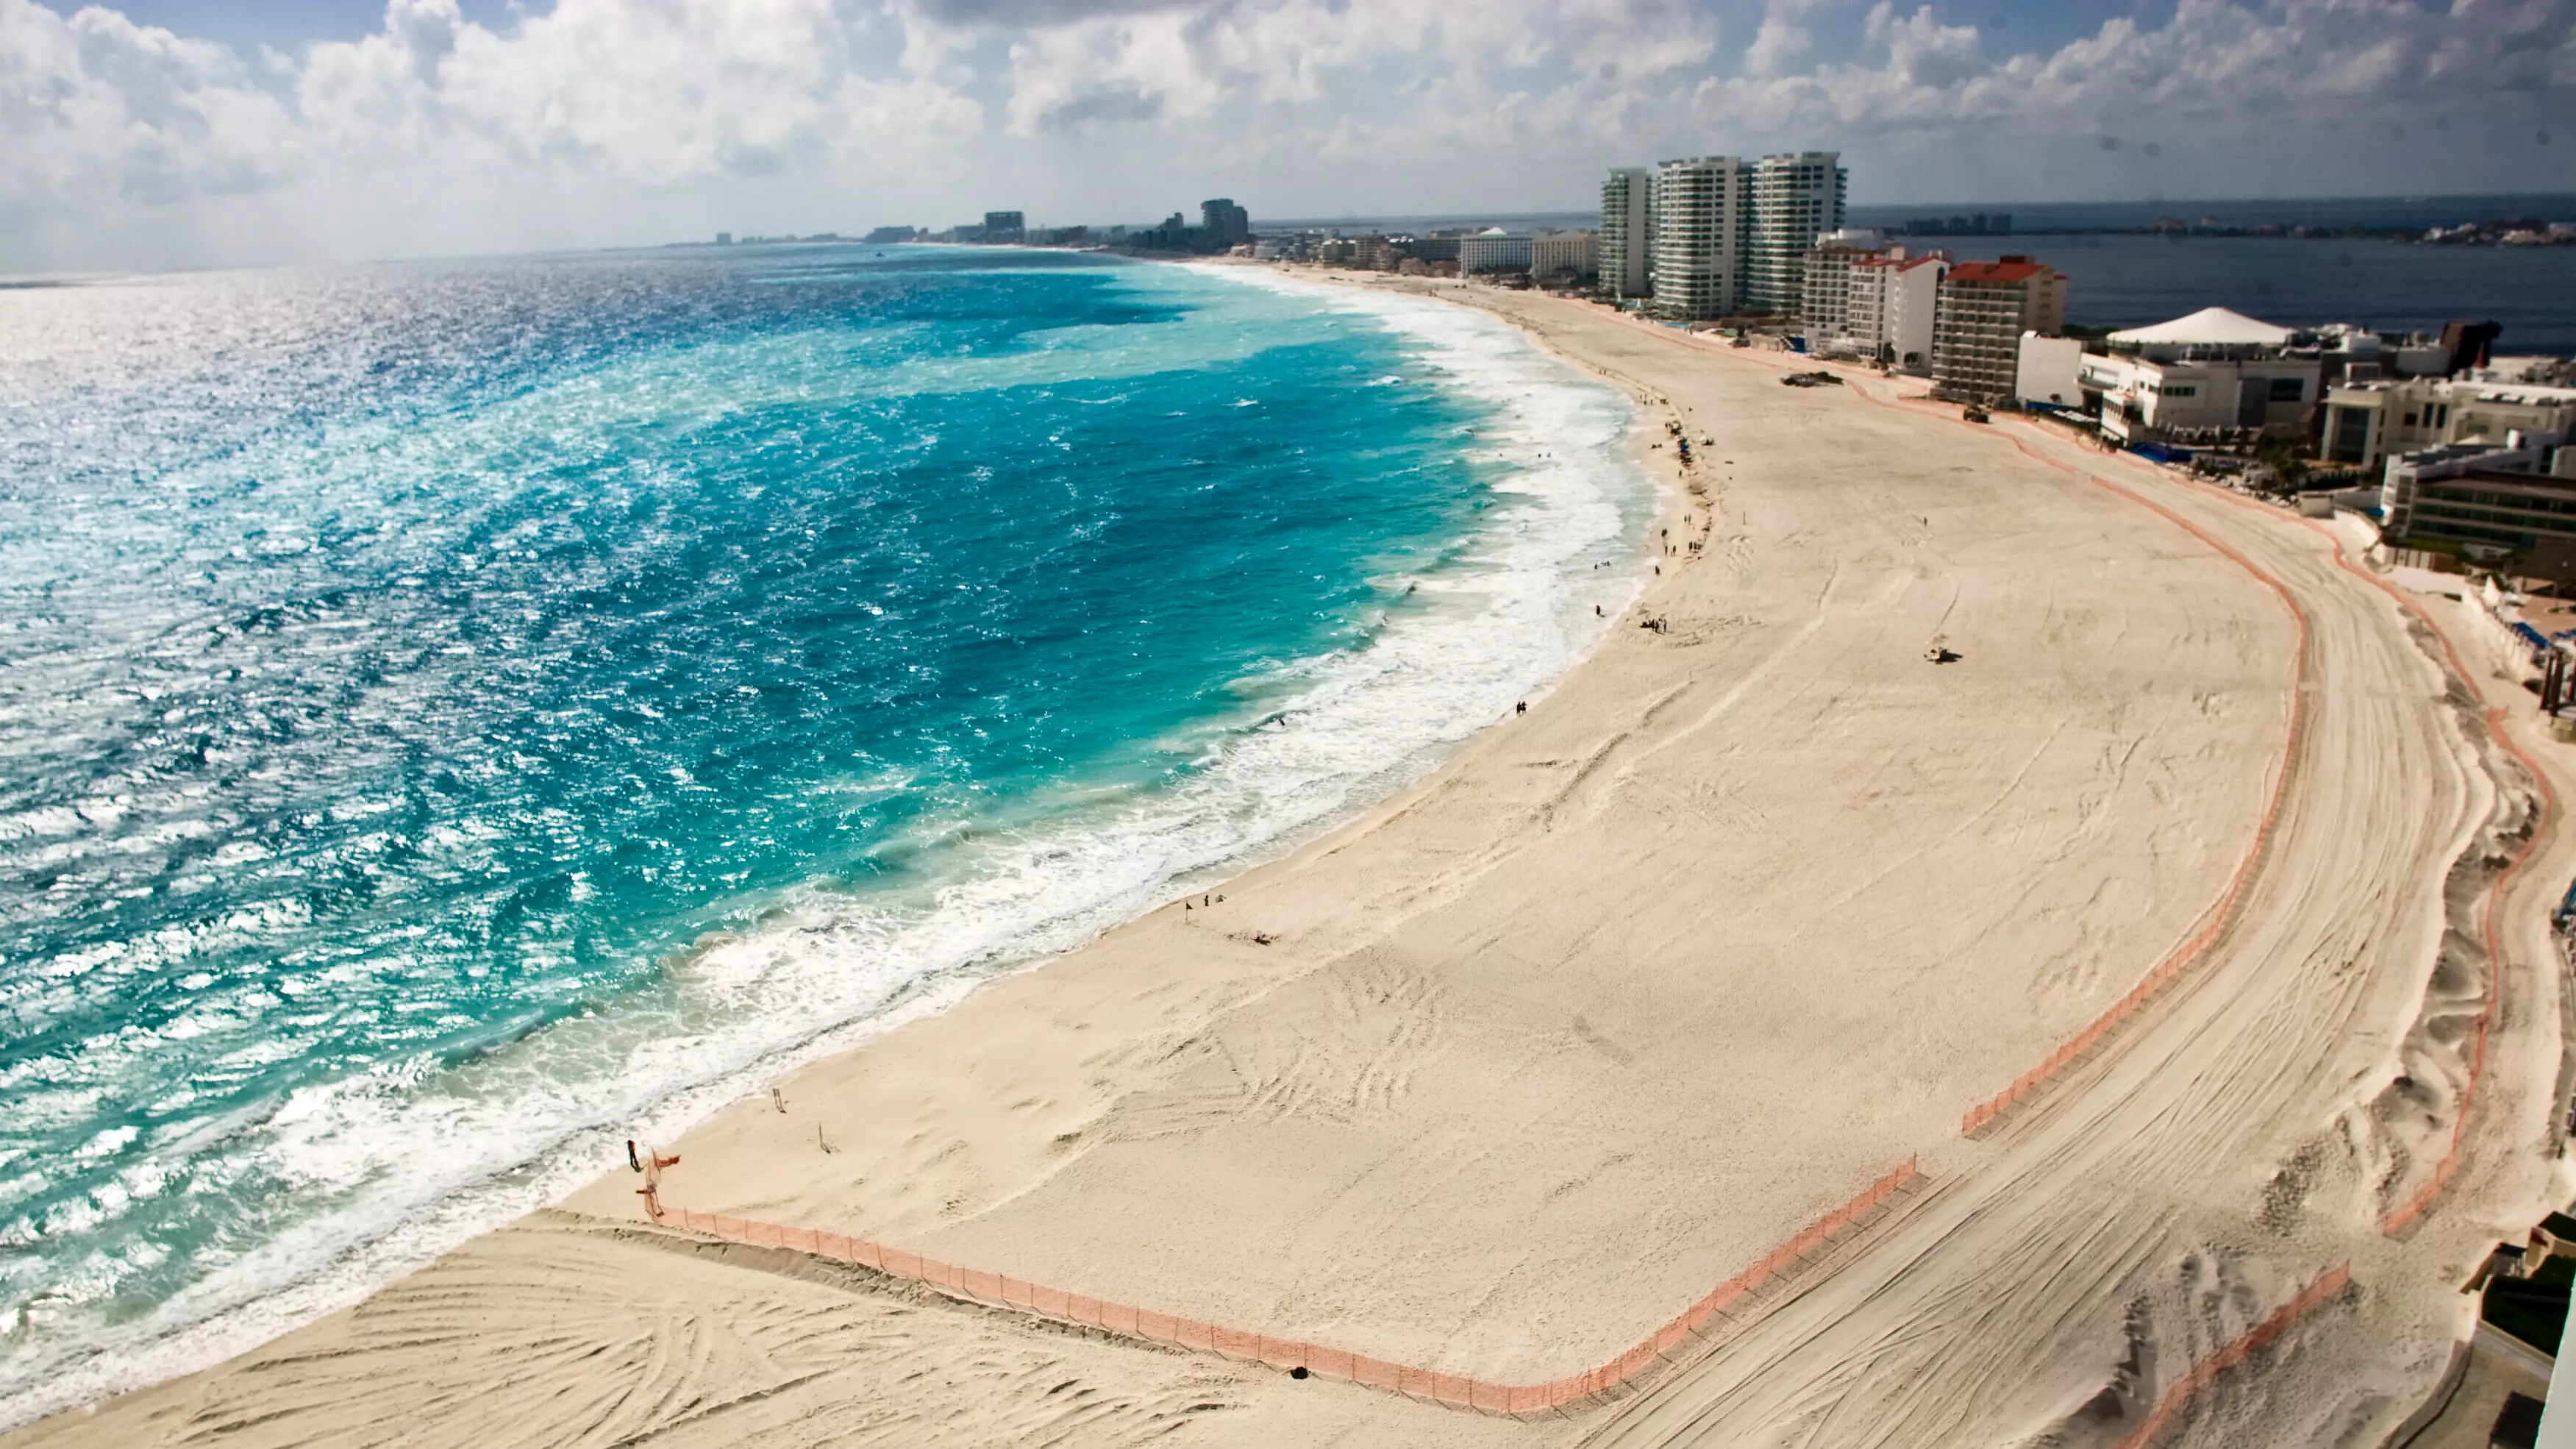 Holiday Paradise Cancún Is Fast Becoming One Of The Deadliest Cities In The World